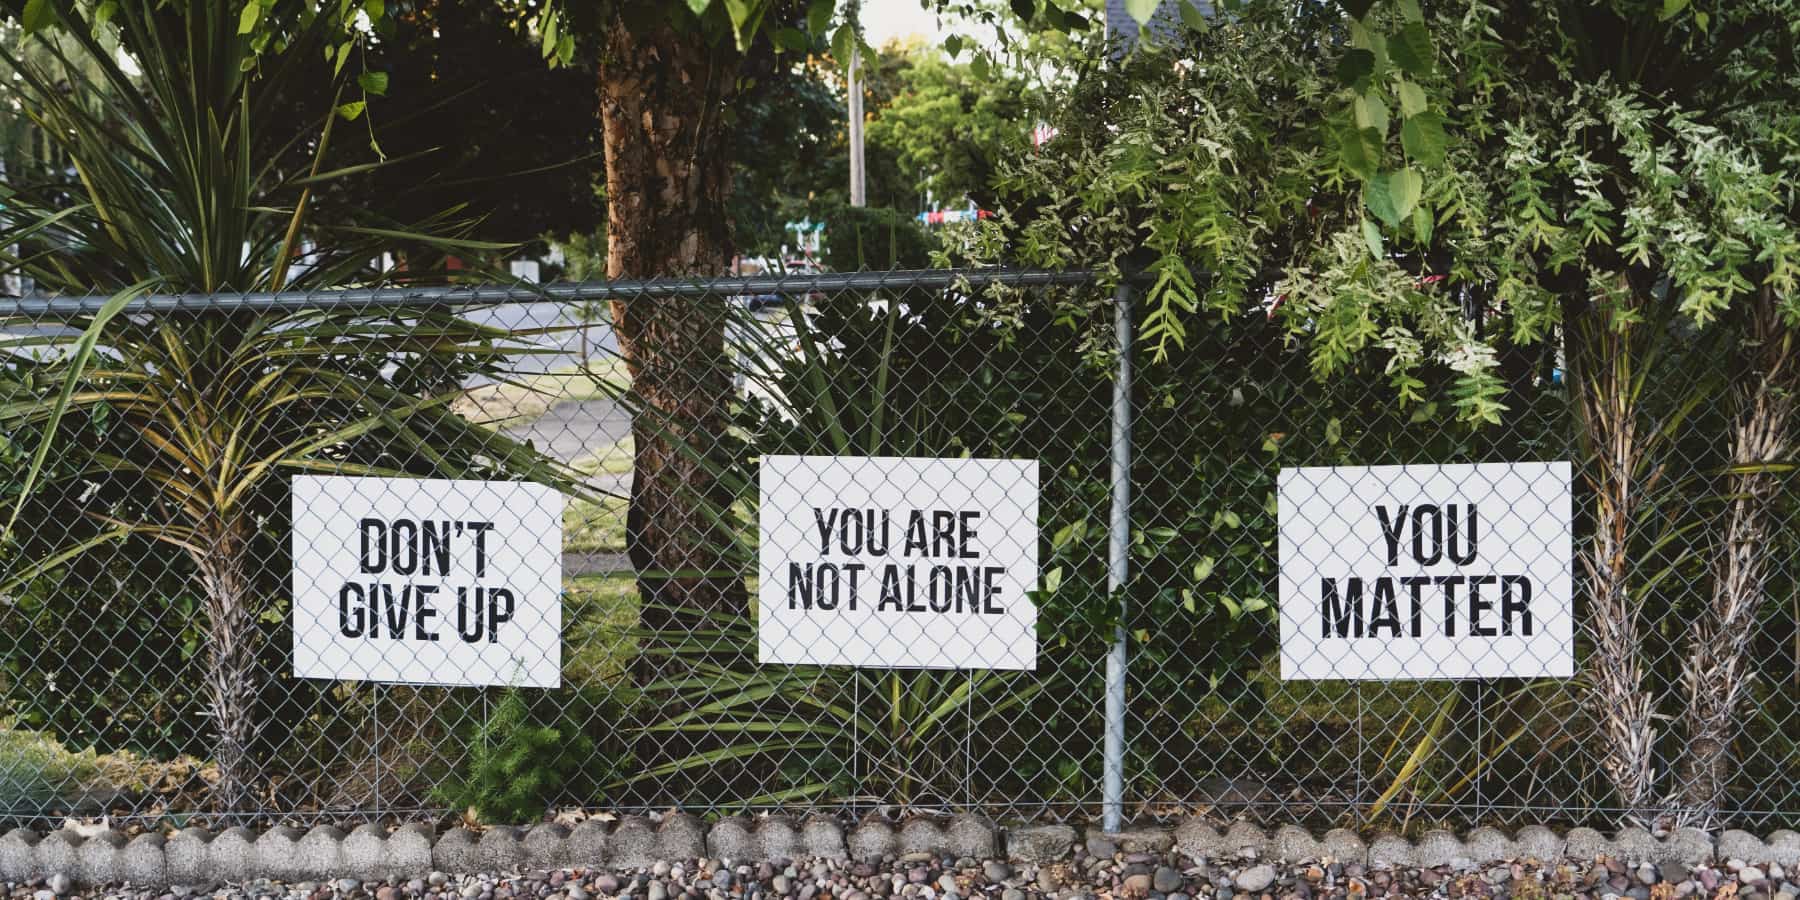 Three simple signs on a chain fence against plants. Dont give up. You are not alone. You matter.